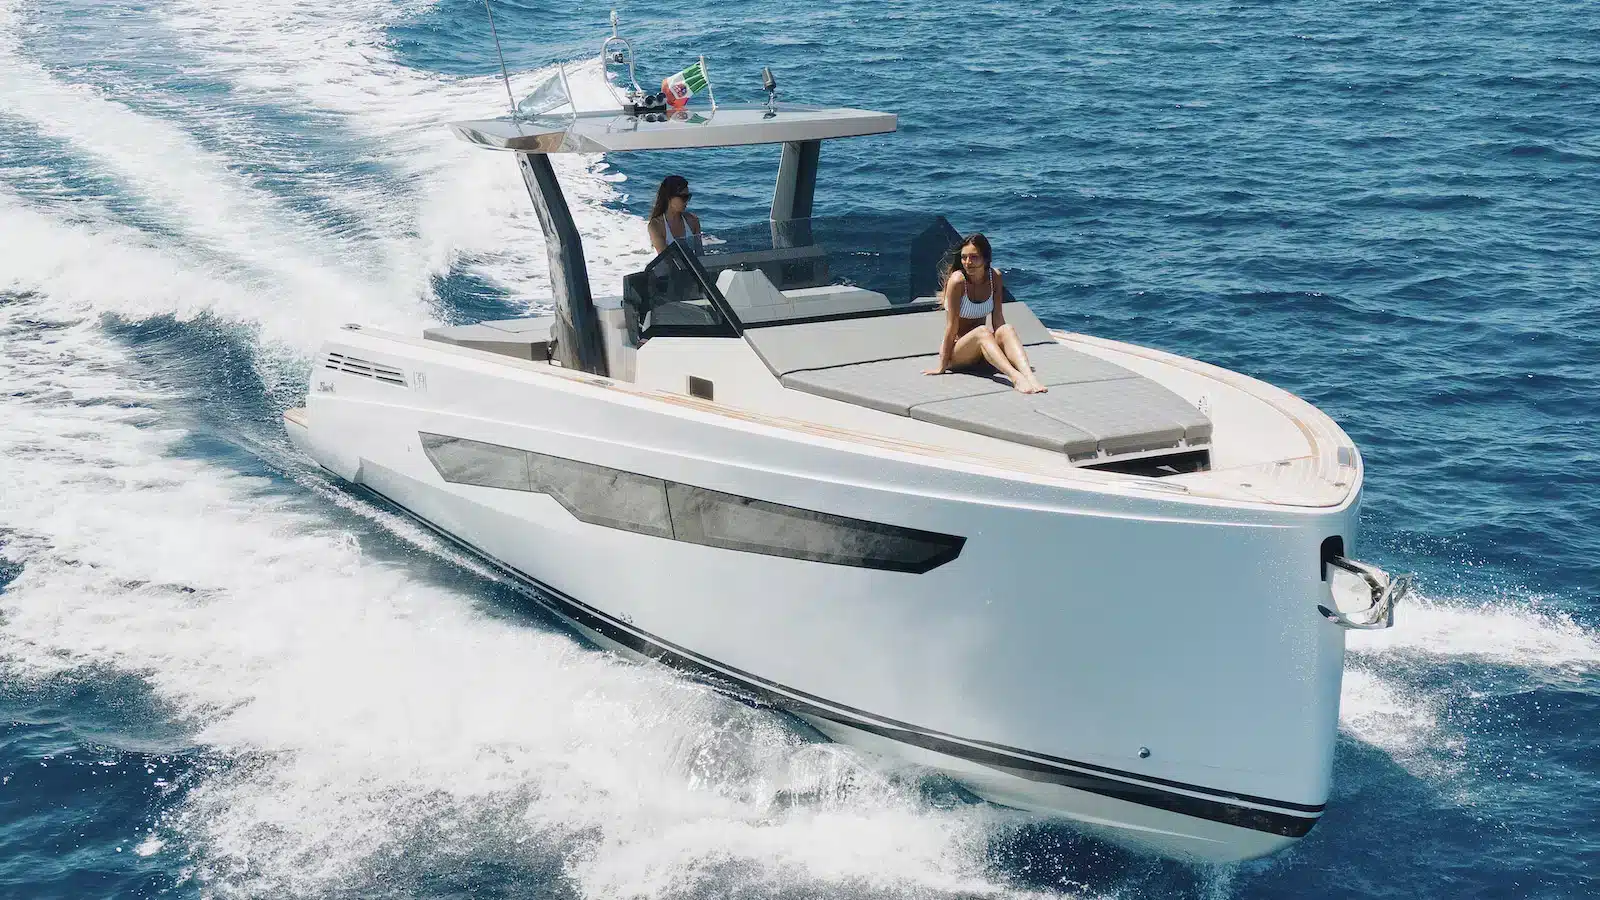 Fiart seduces the USA with Seawalker 35 and 39